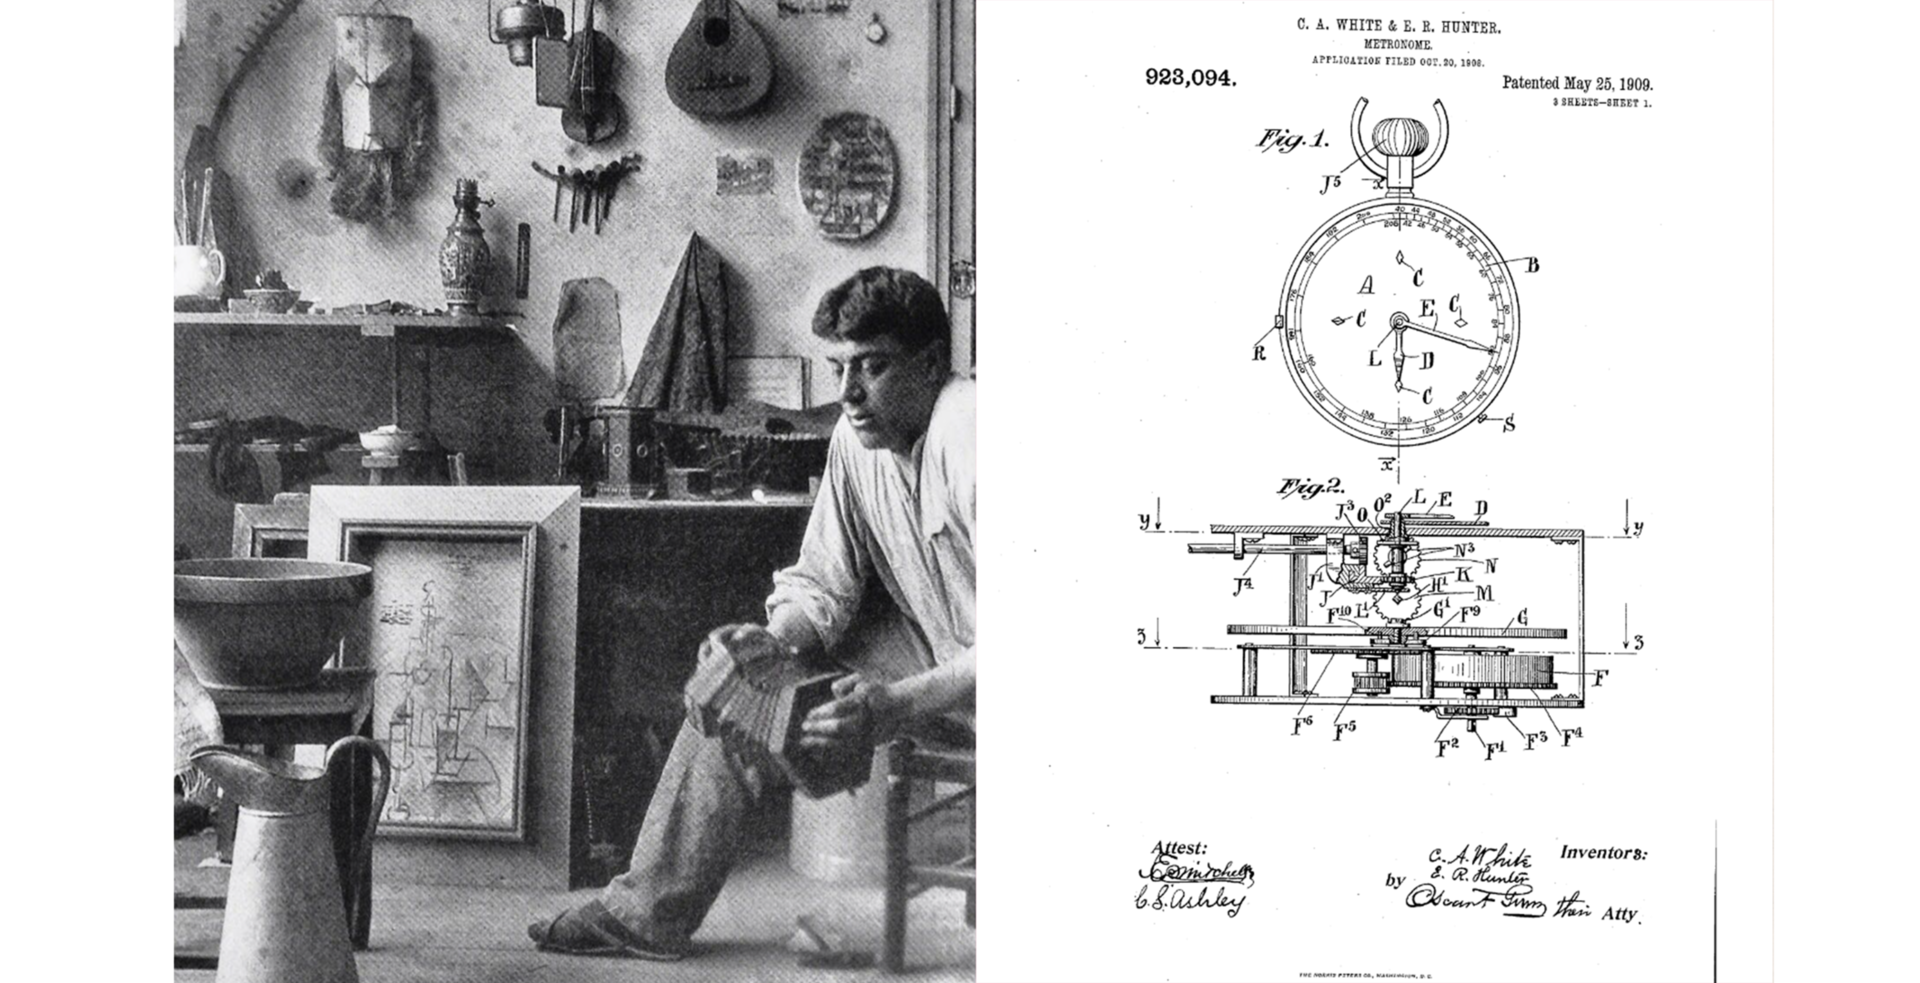 (Left) Photograph of Georges Braque seated at right, leaning forward in a chair and holding a concertina, in front of a wall in his studio where various instruments, masks and objects hang (Right) Page from a patent application showing a schematic drawing of a metronome in the shape of a pocket watch